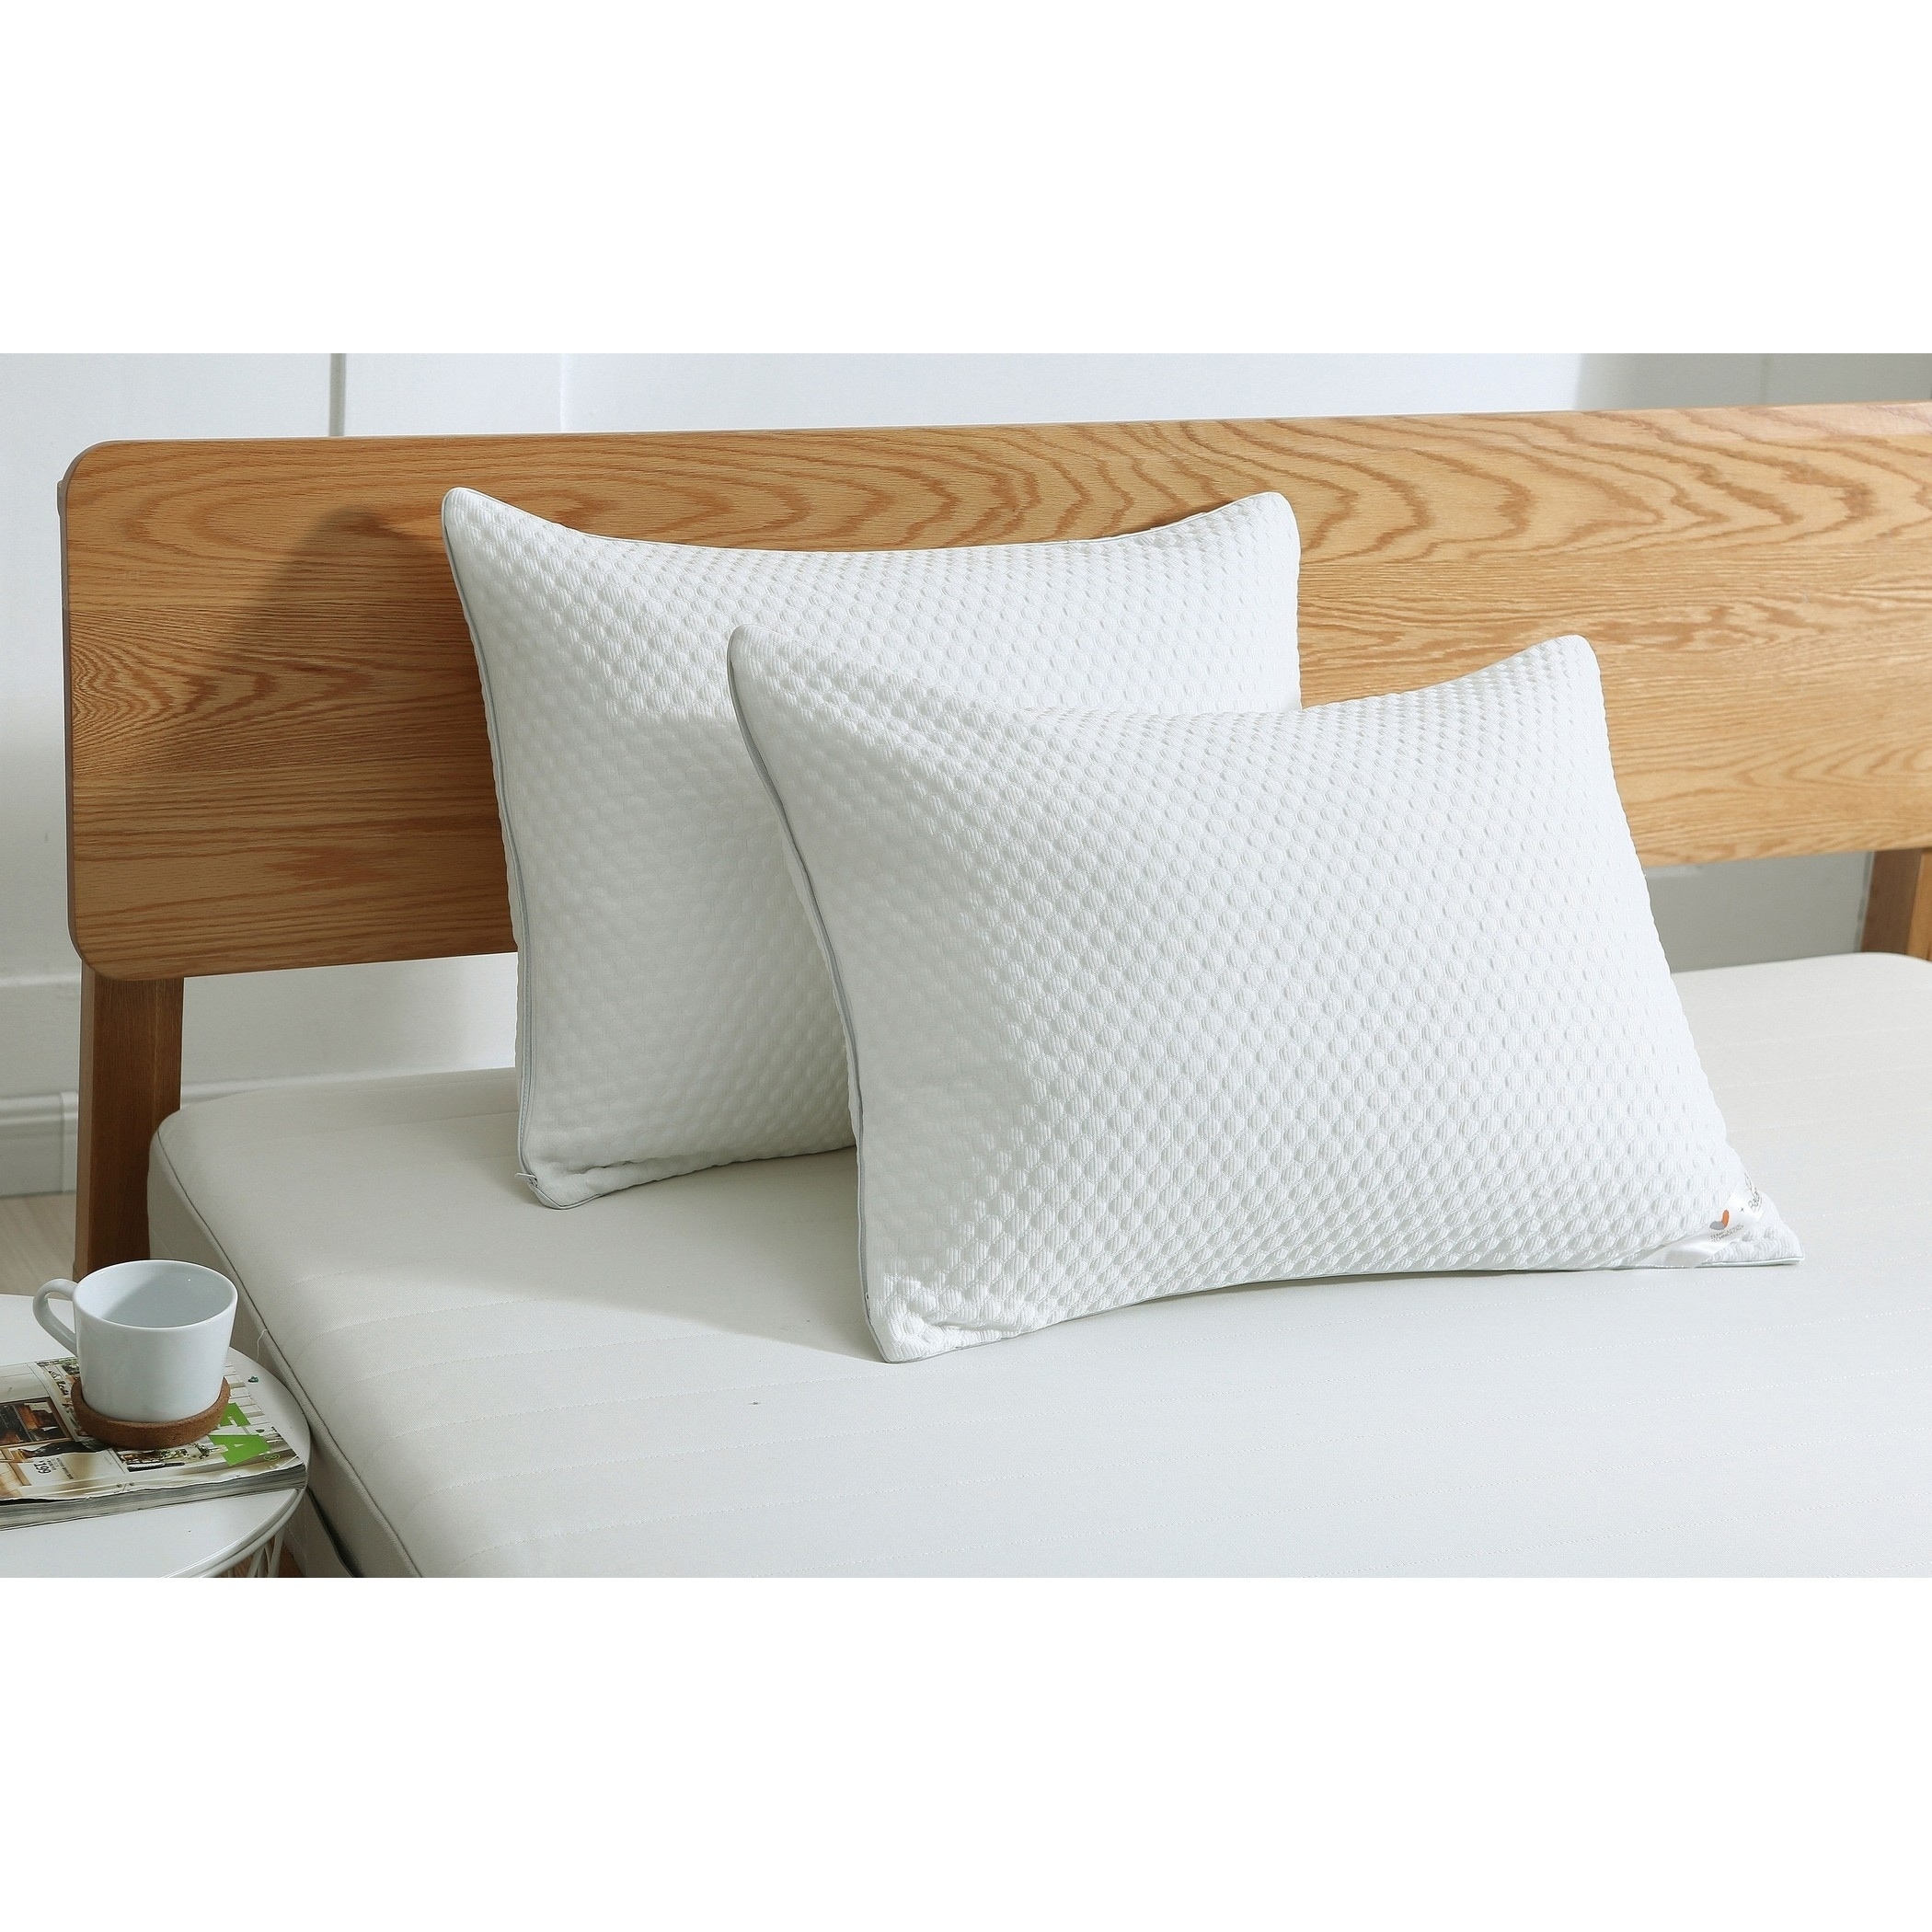 Jumbo St James Home Soft Knit Silver Duck Nano Feather Pillows Set of 2